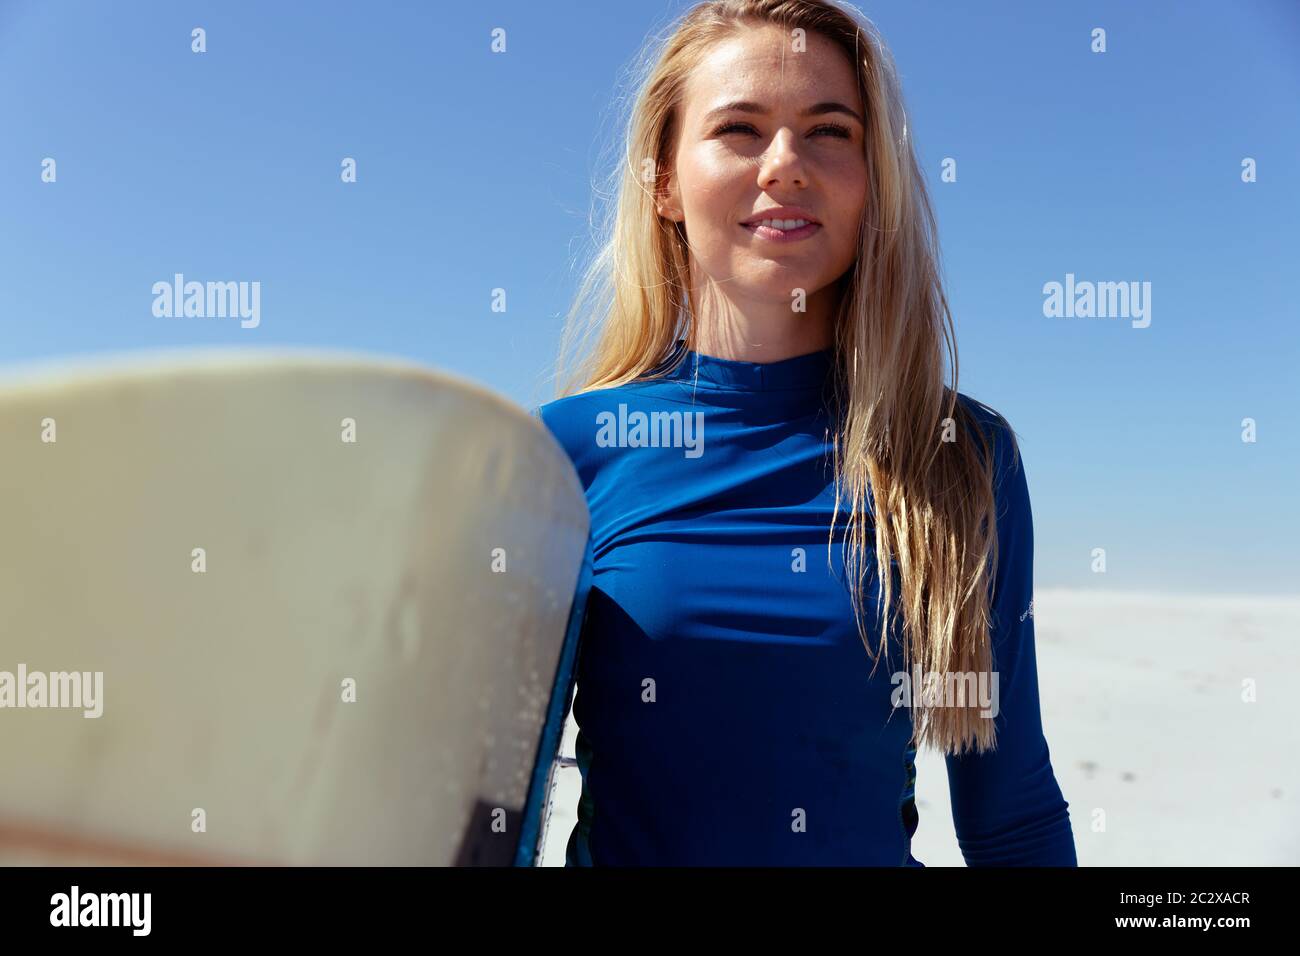 Caucasian woman during surf session at beach Stock Photo